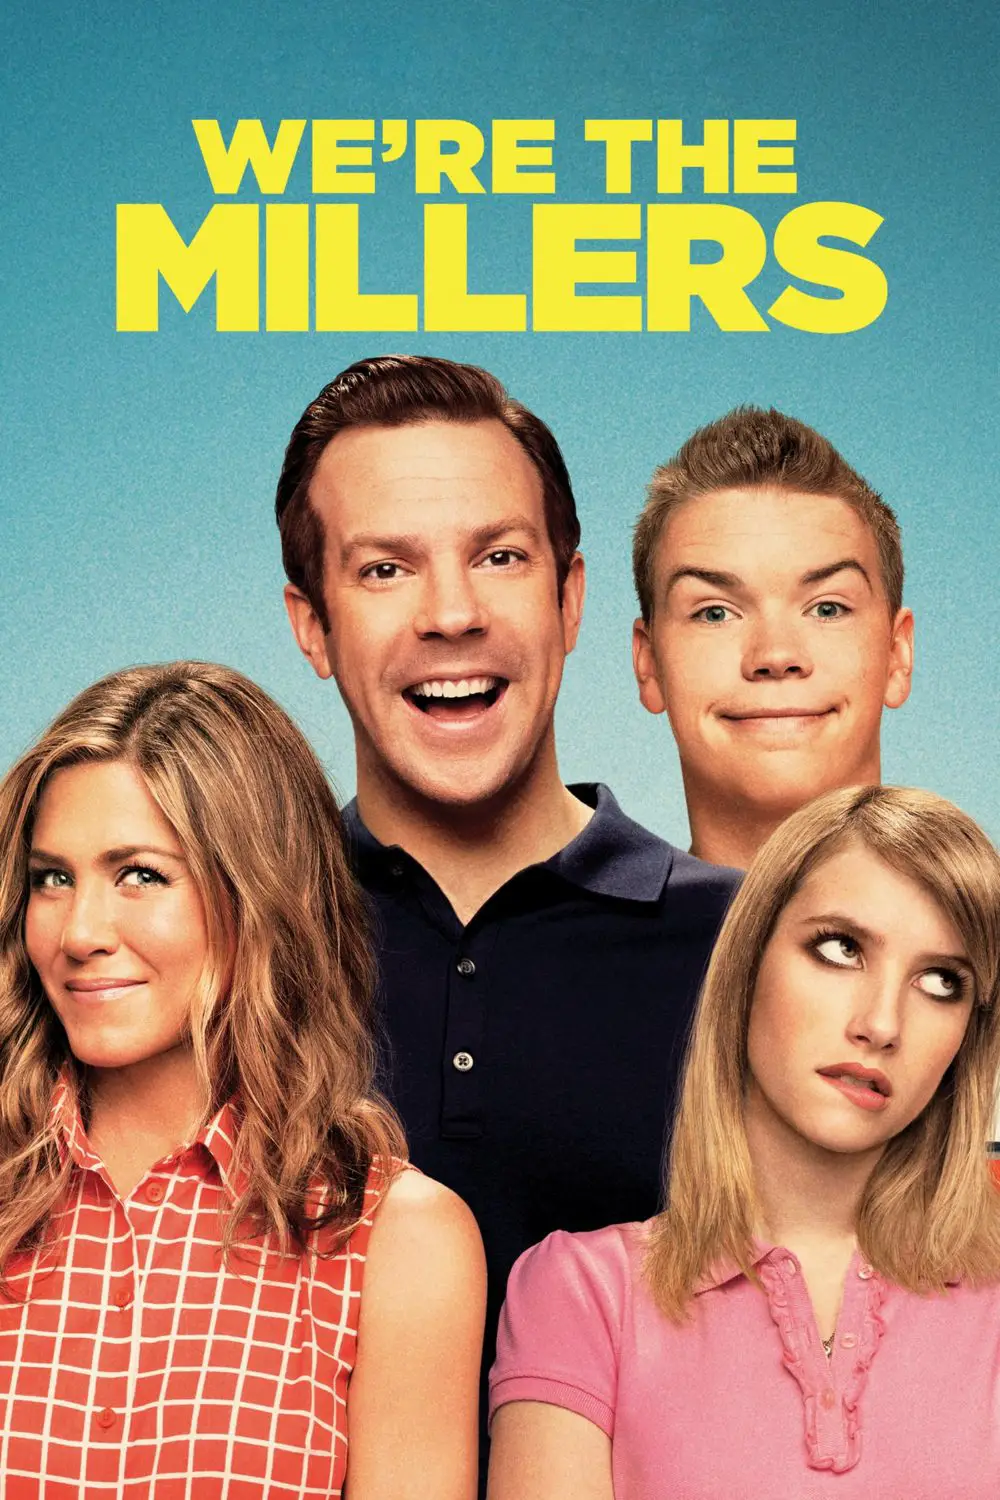 You are currently viewing We’re the Millers